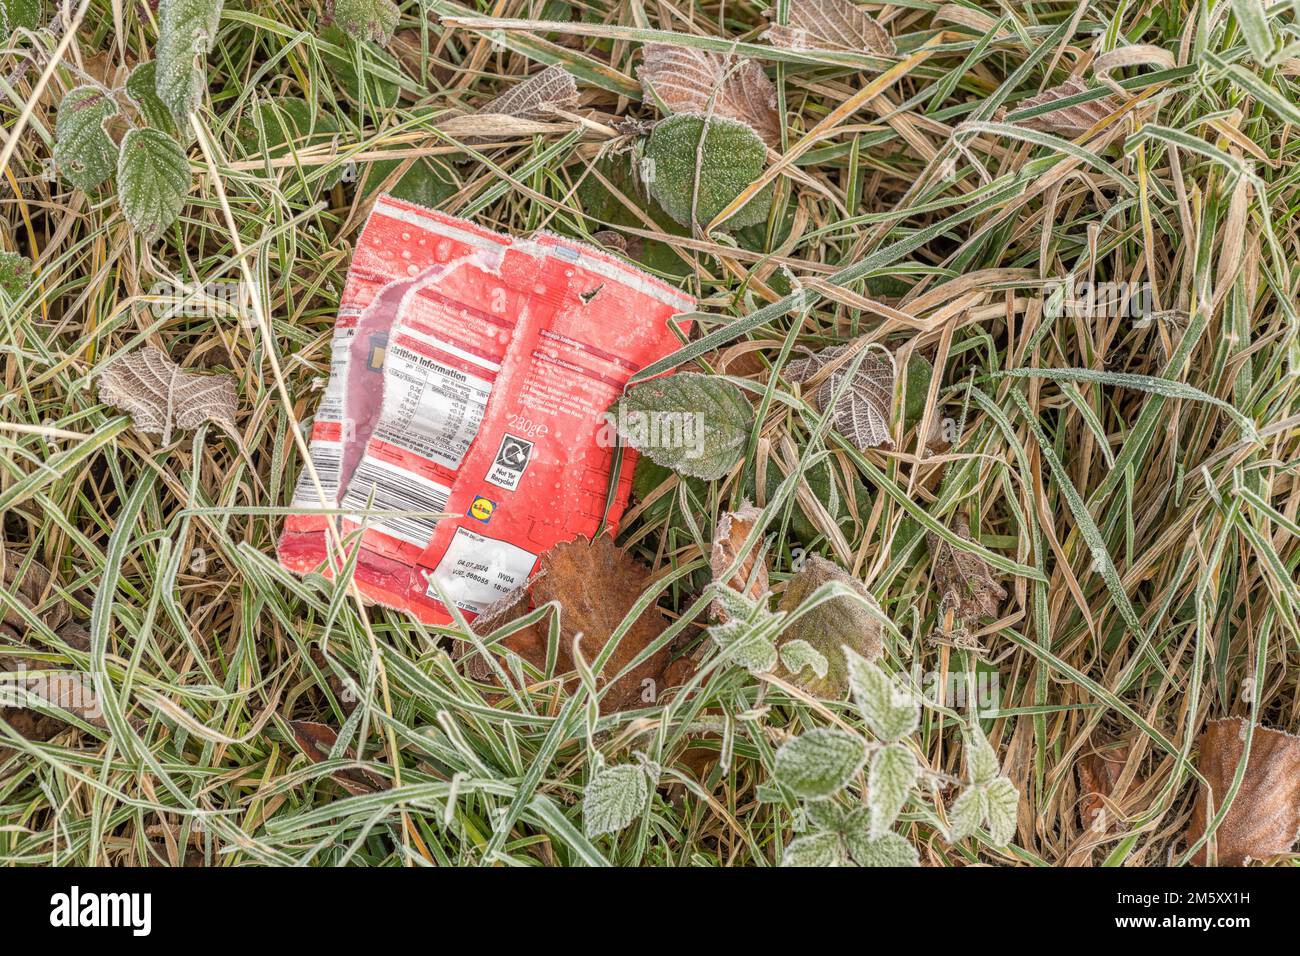 Single use foil-wrap plastic food packaging in grass verge of a country road. For environmental pollution in UK countryside. Clean Up Britain. Stock Photo